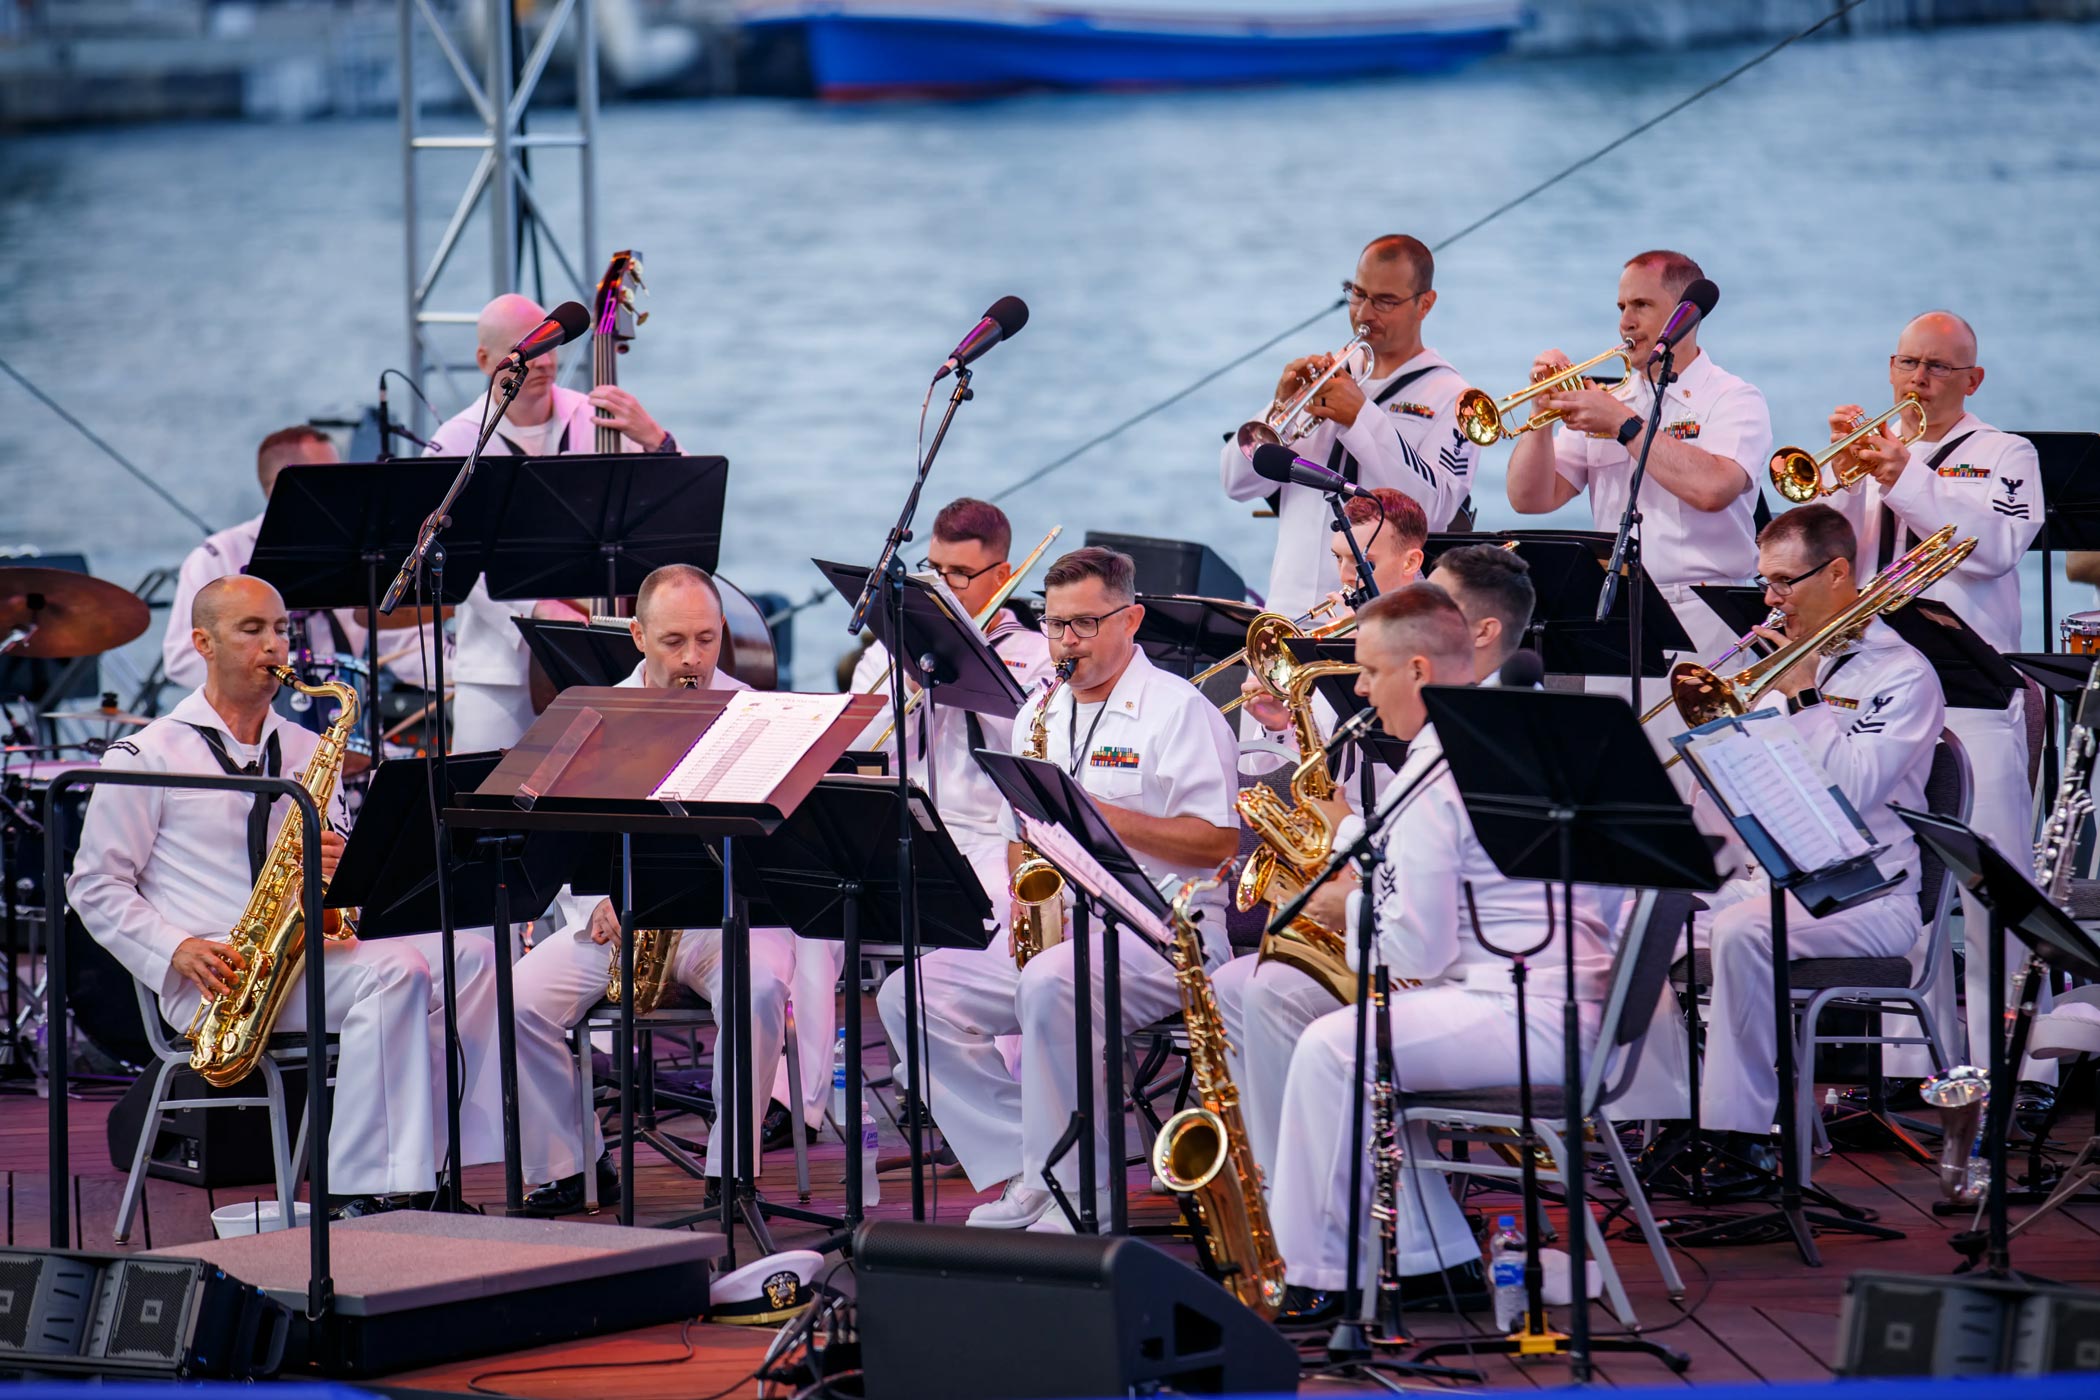 Brass Performers at Great Lakes Navy Band Navy Pier Performance